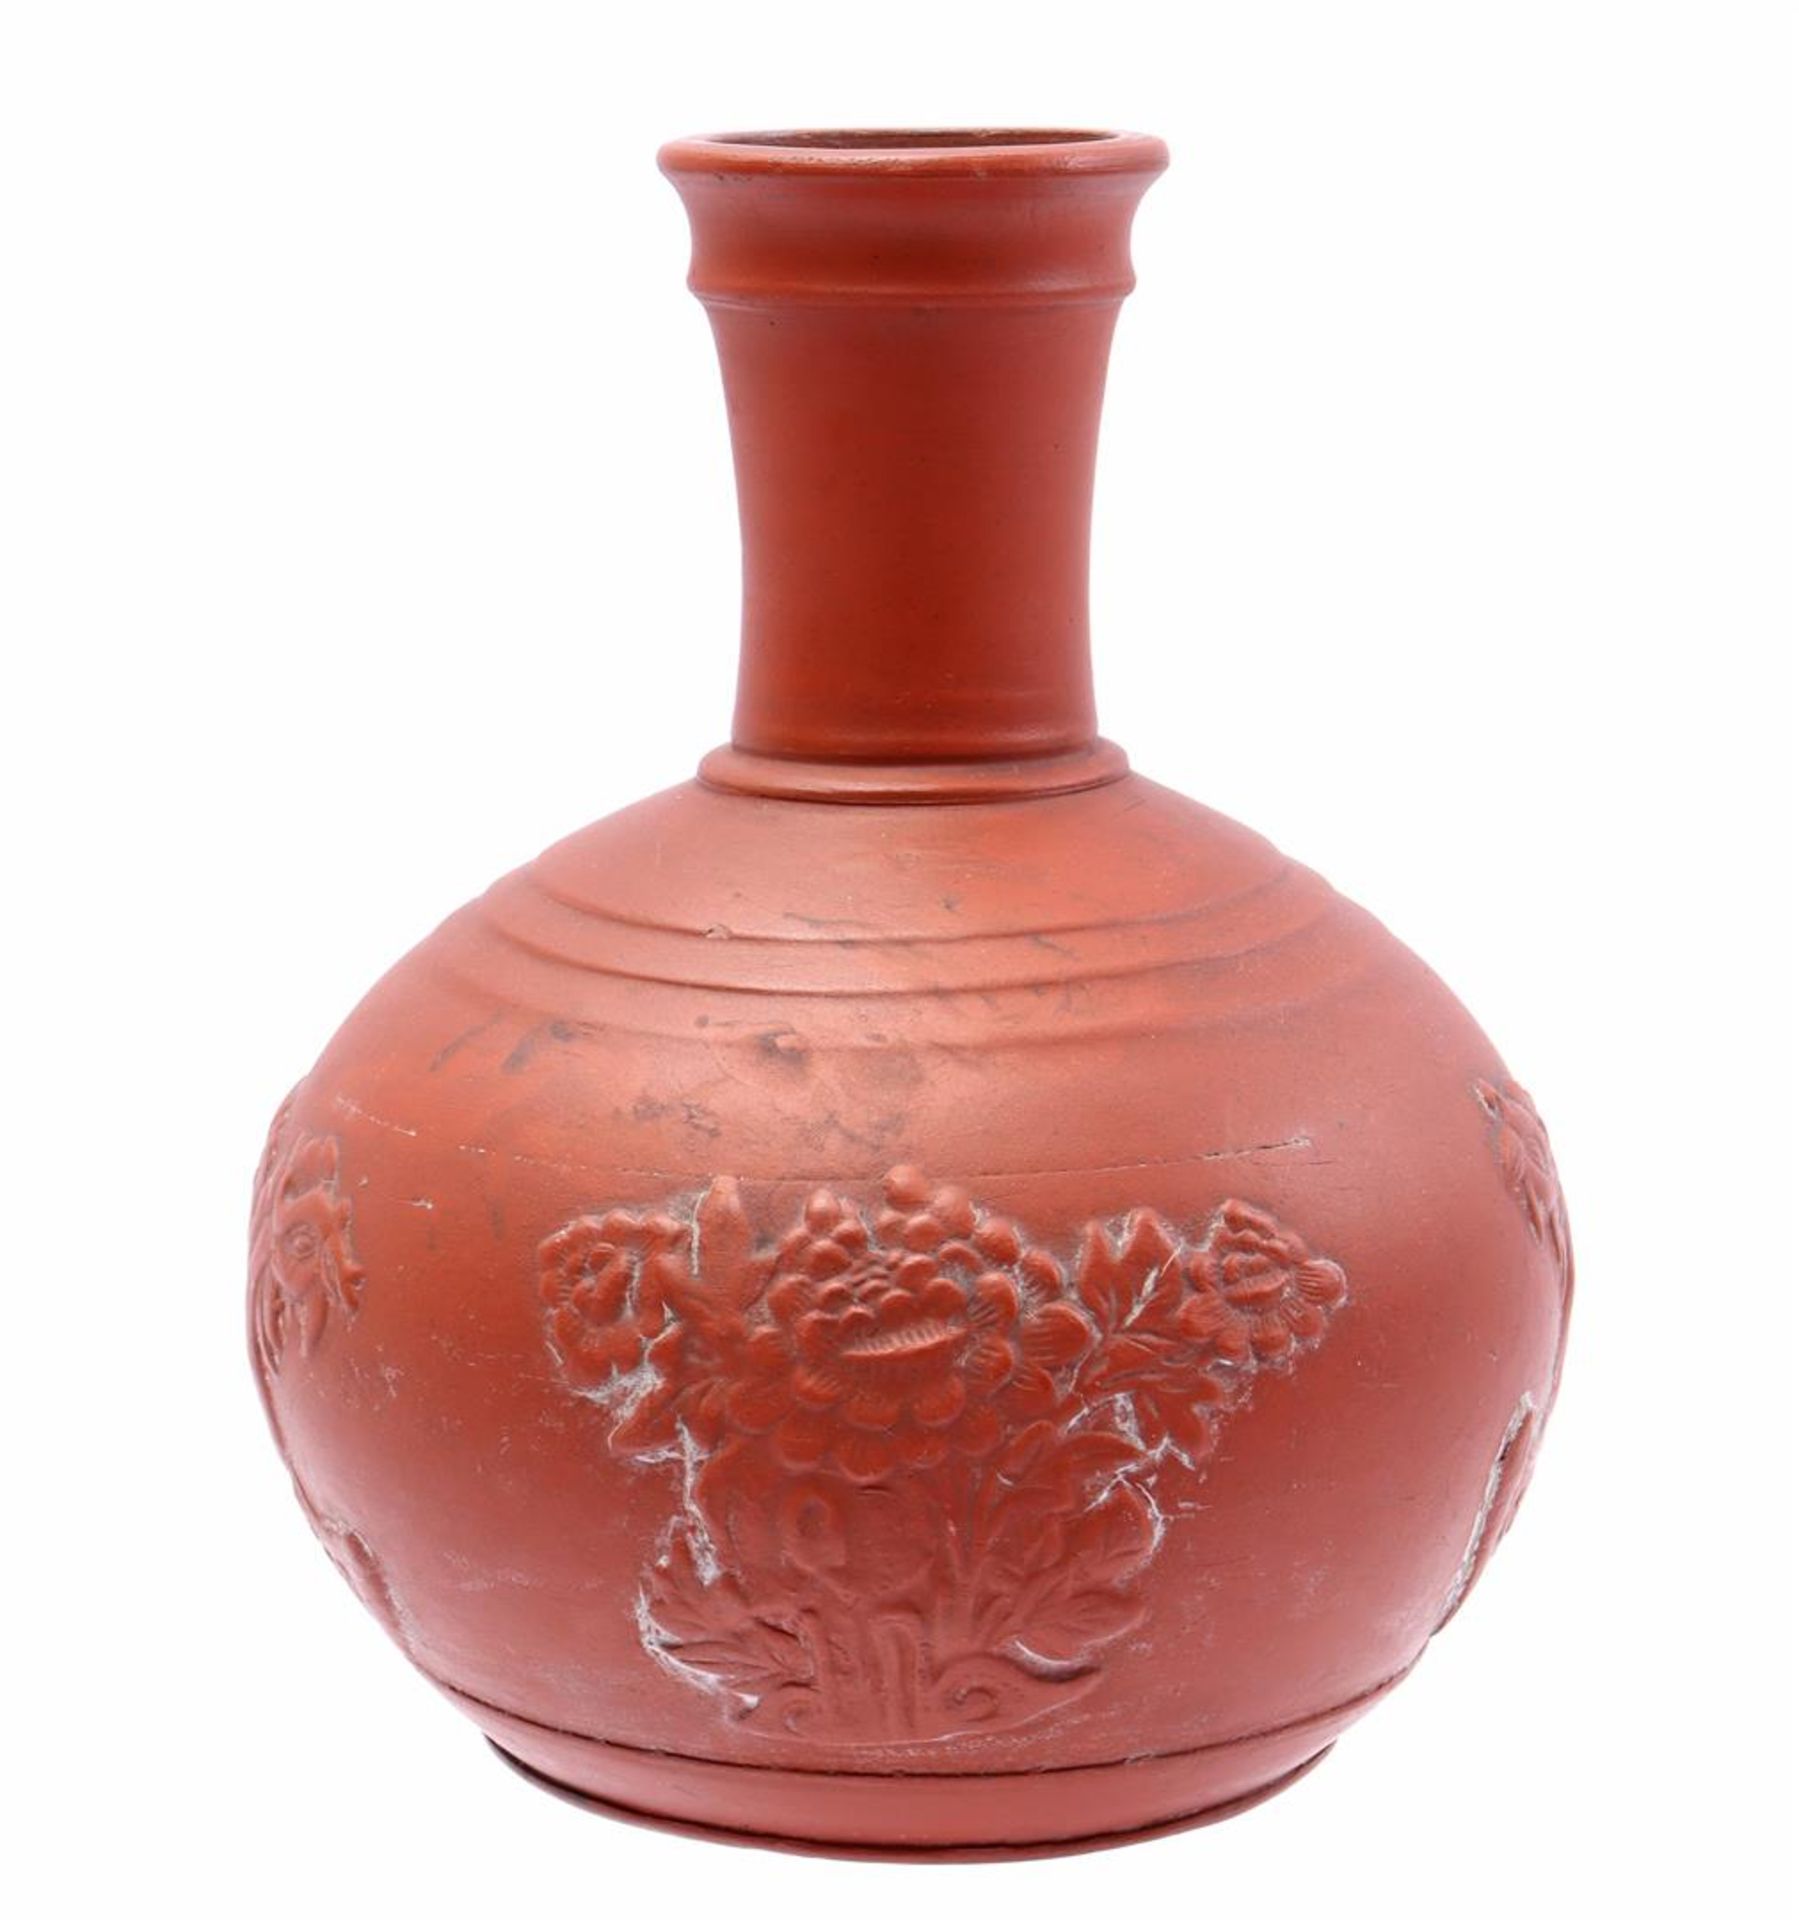 Earthenware Yixing vase with decor of 2 phoenixes and a flower vase